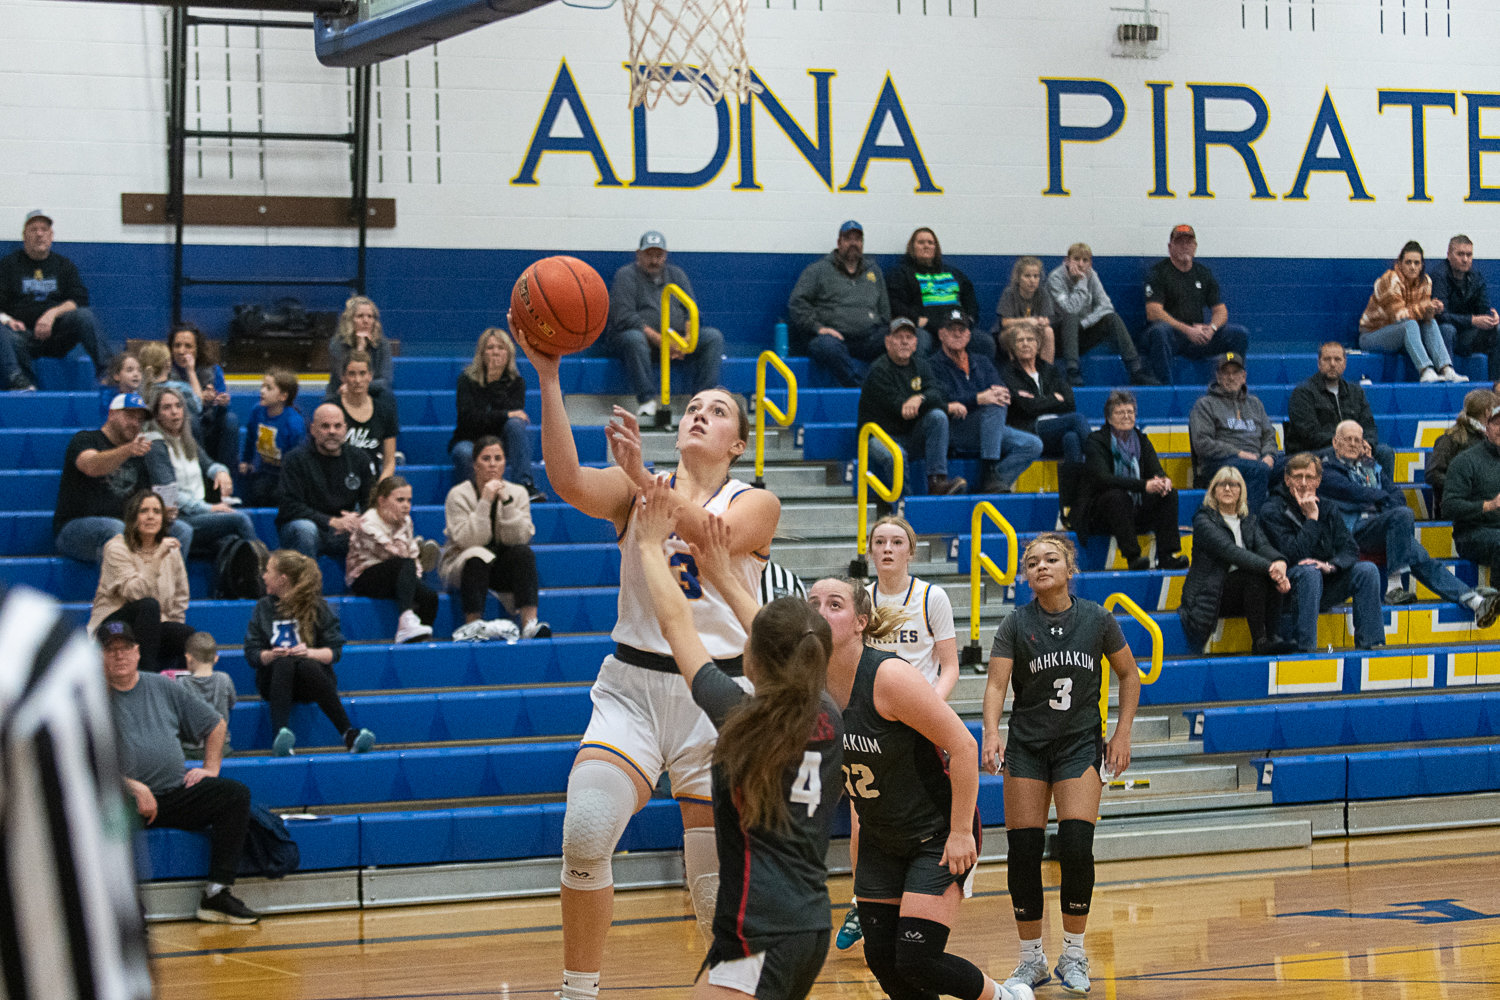 Karlee VonMoos takes a layup in transition during Adna's 72-28 win over Wahkiakum on Jan. 13.